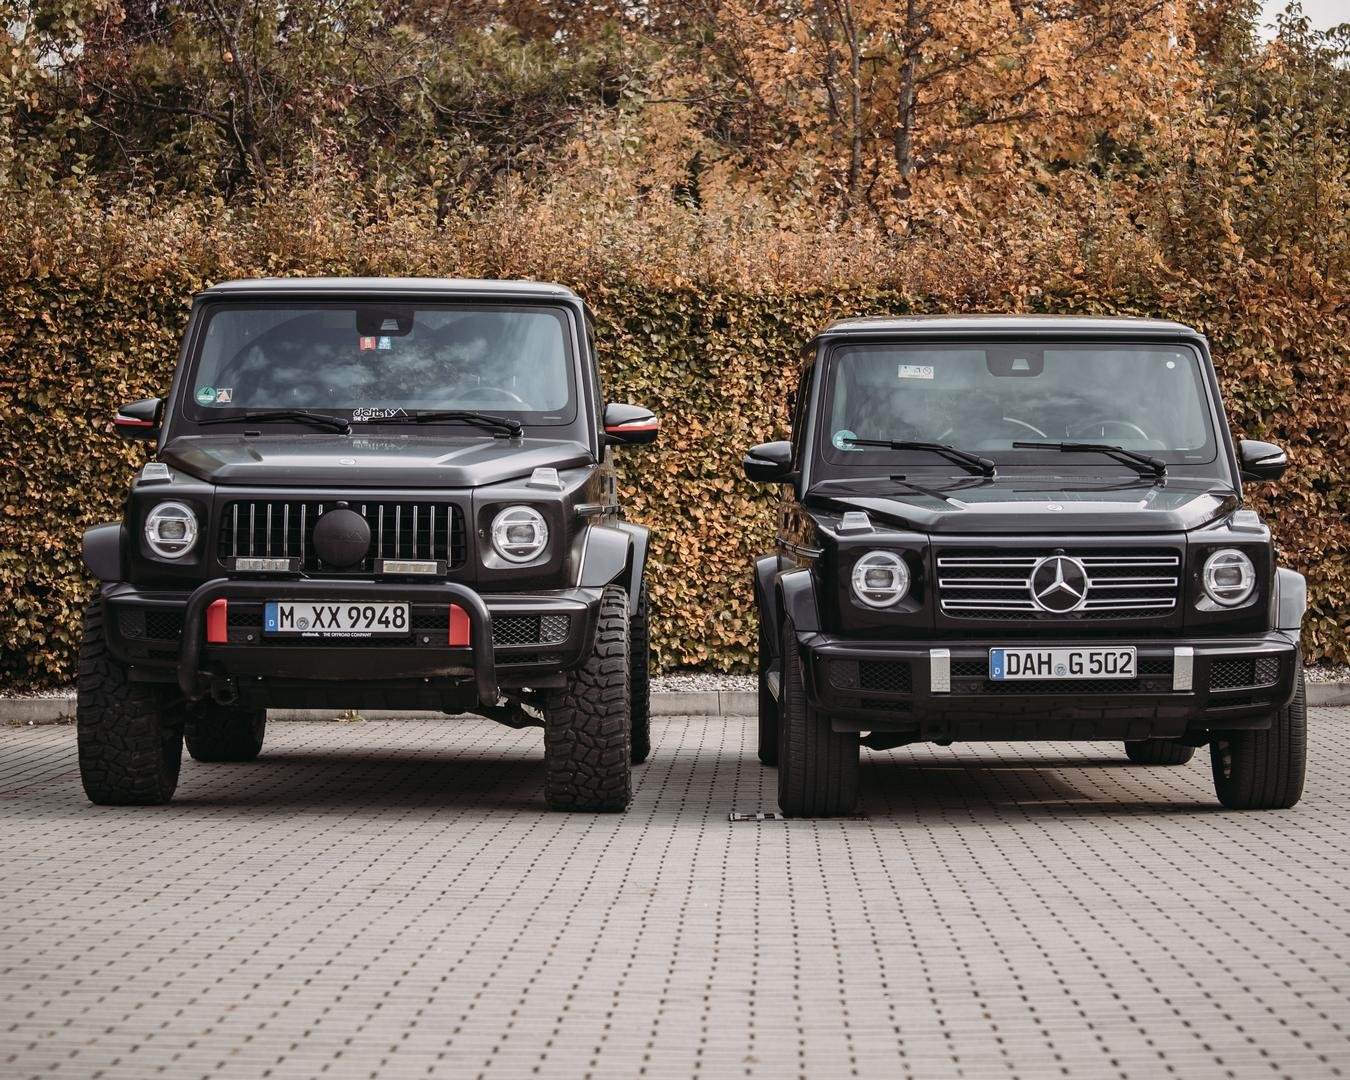 The Mercedes-Benz G-Class of Delta4x4 nothing can resist